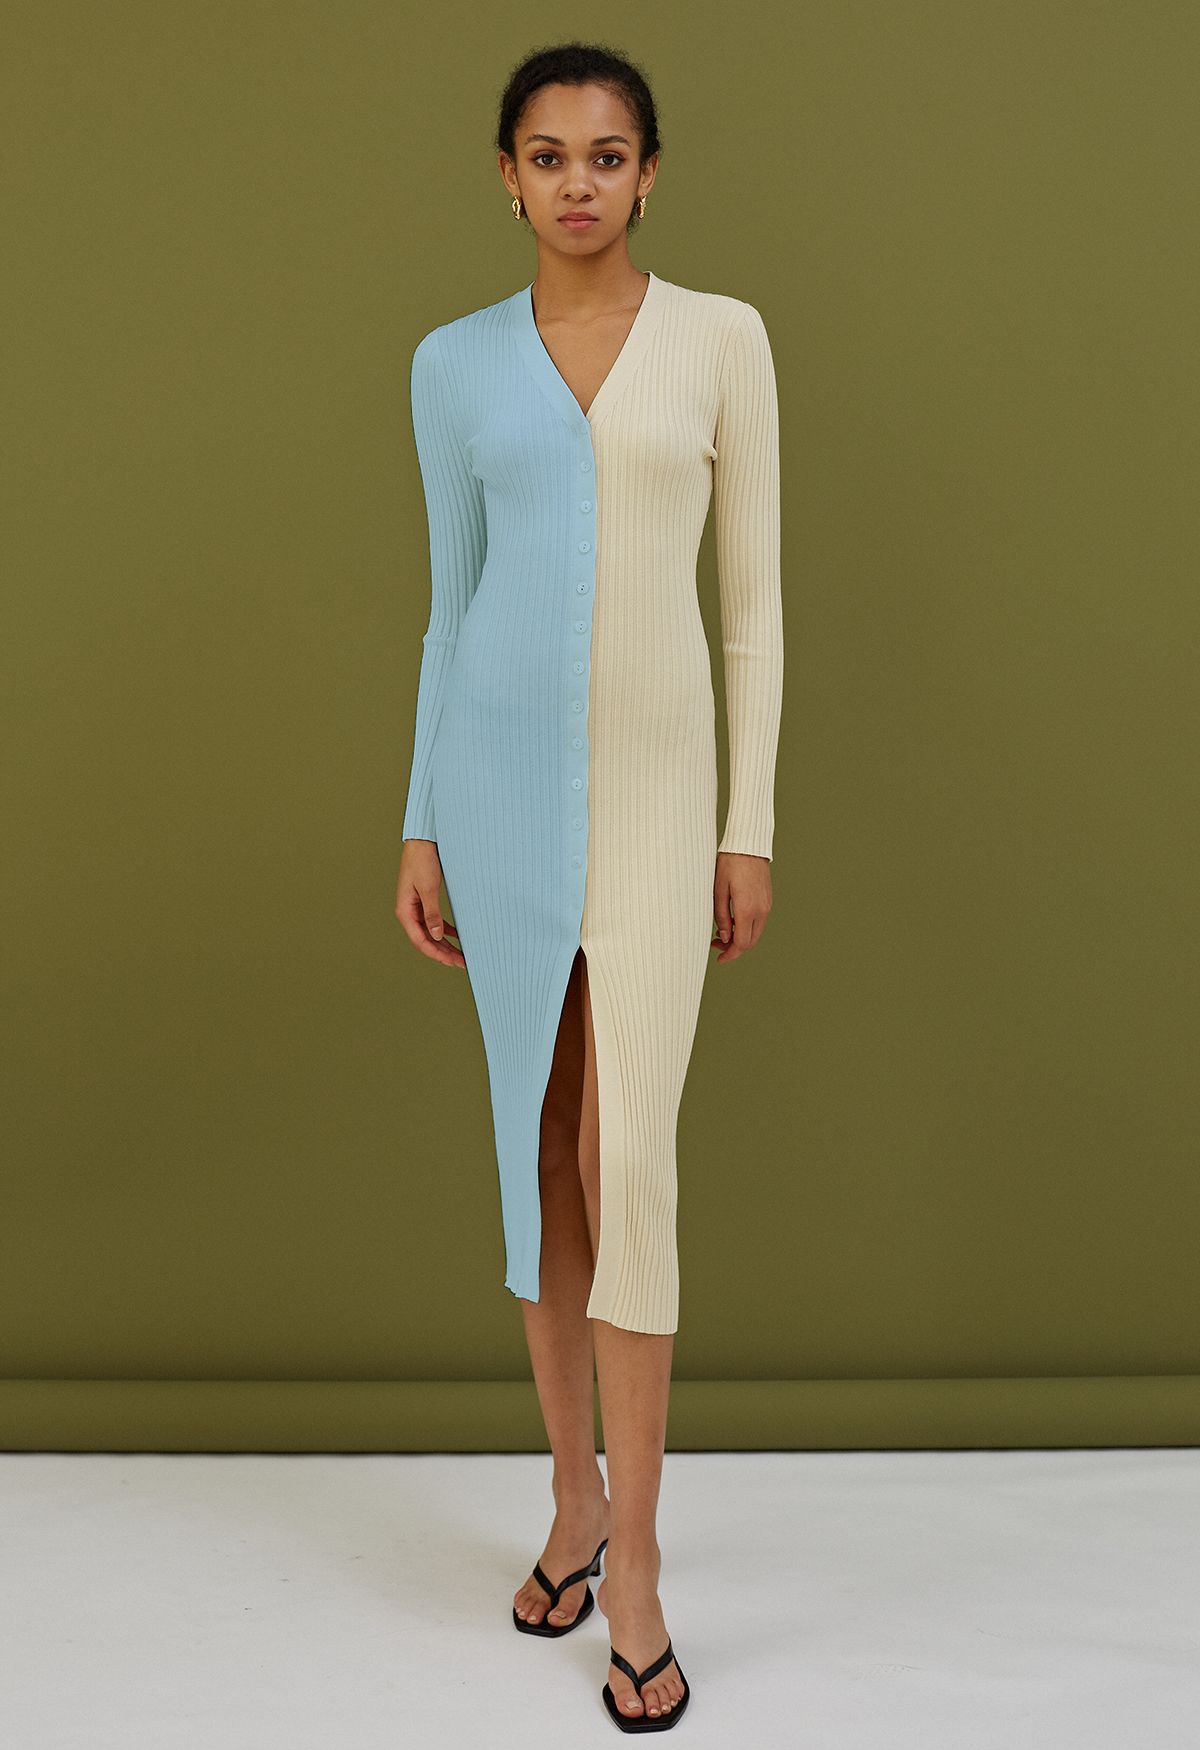 Button Down Two-Tone Spliced Bodycon Knit Dress in Baby Blue